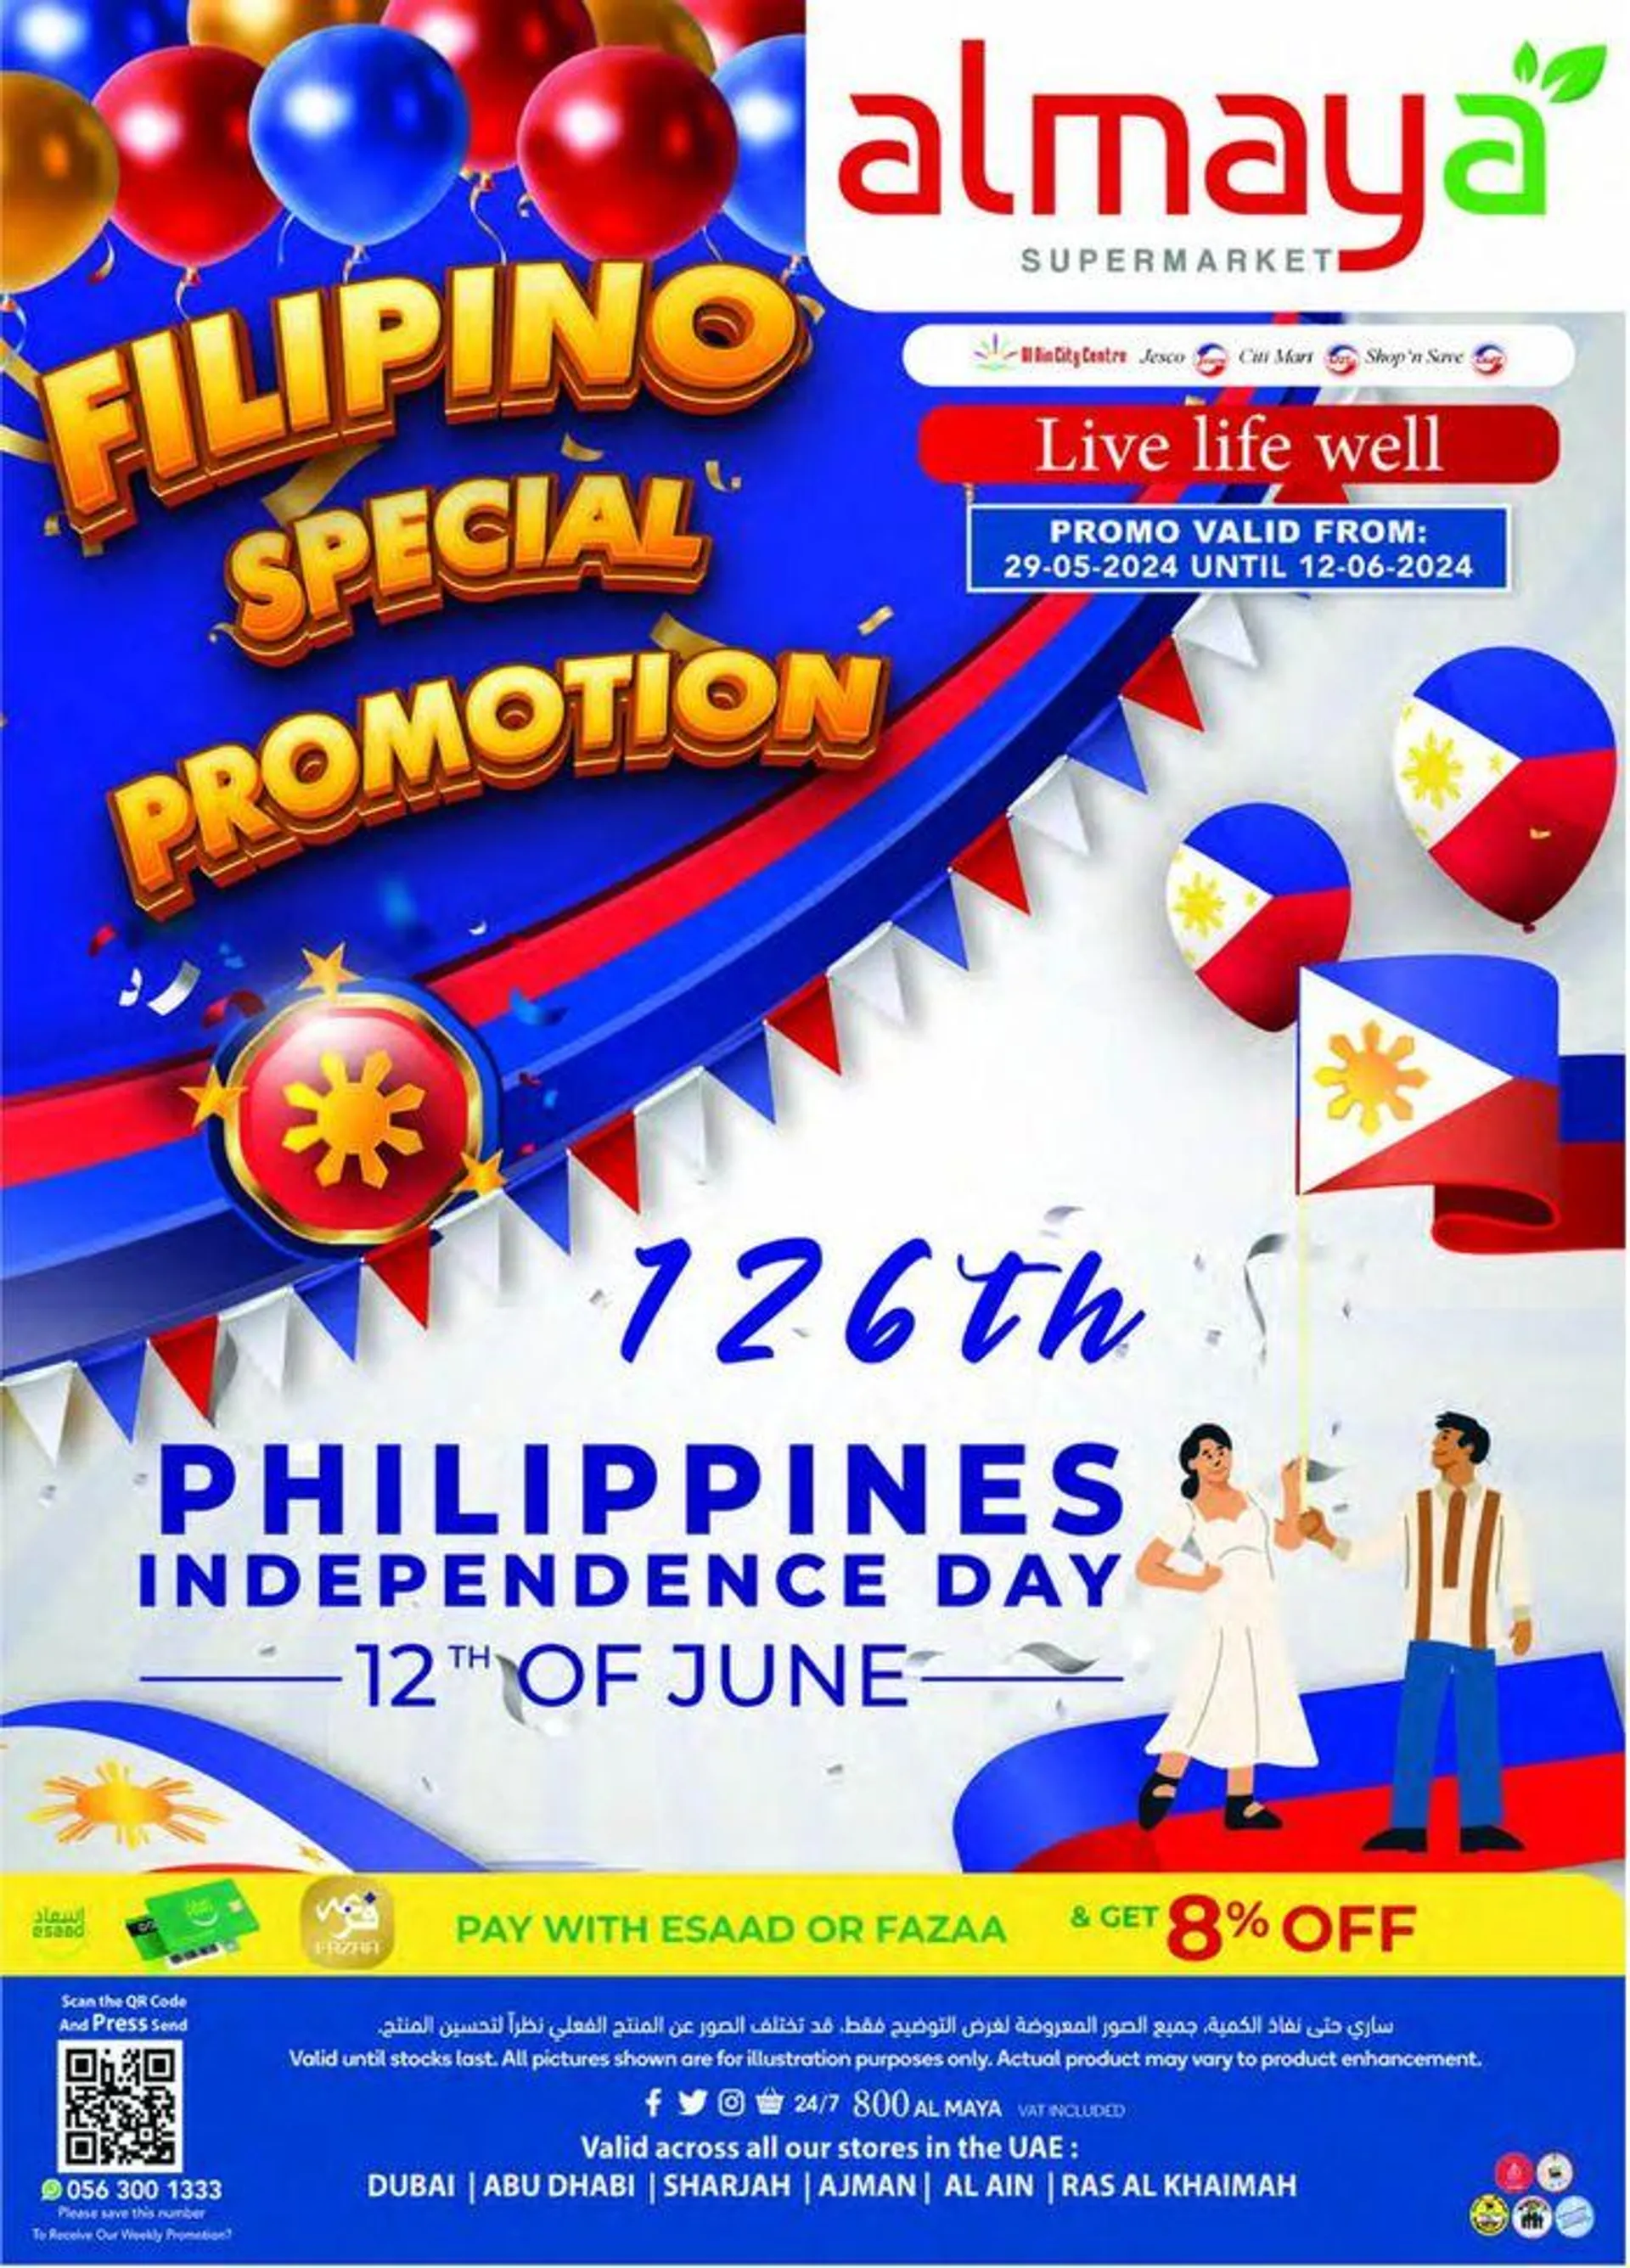 Filipino Special Promotion - 1